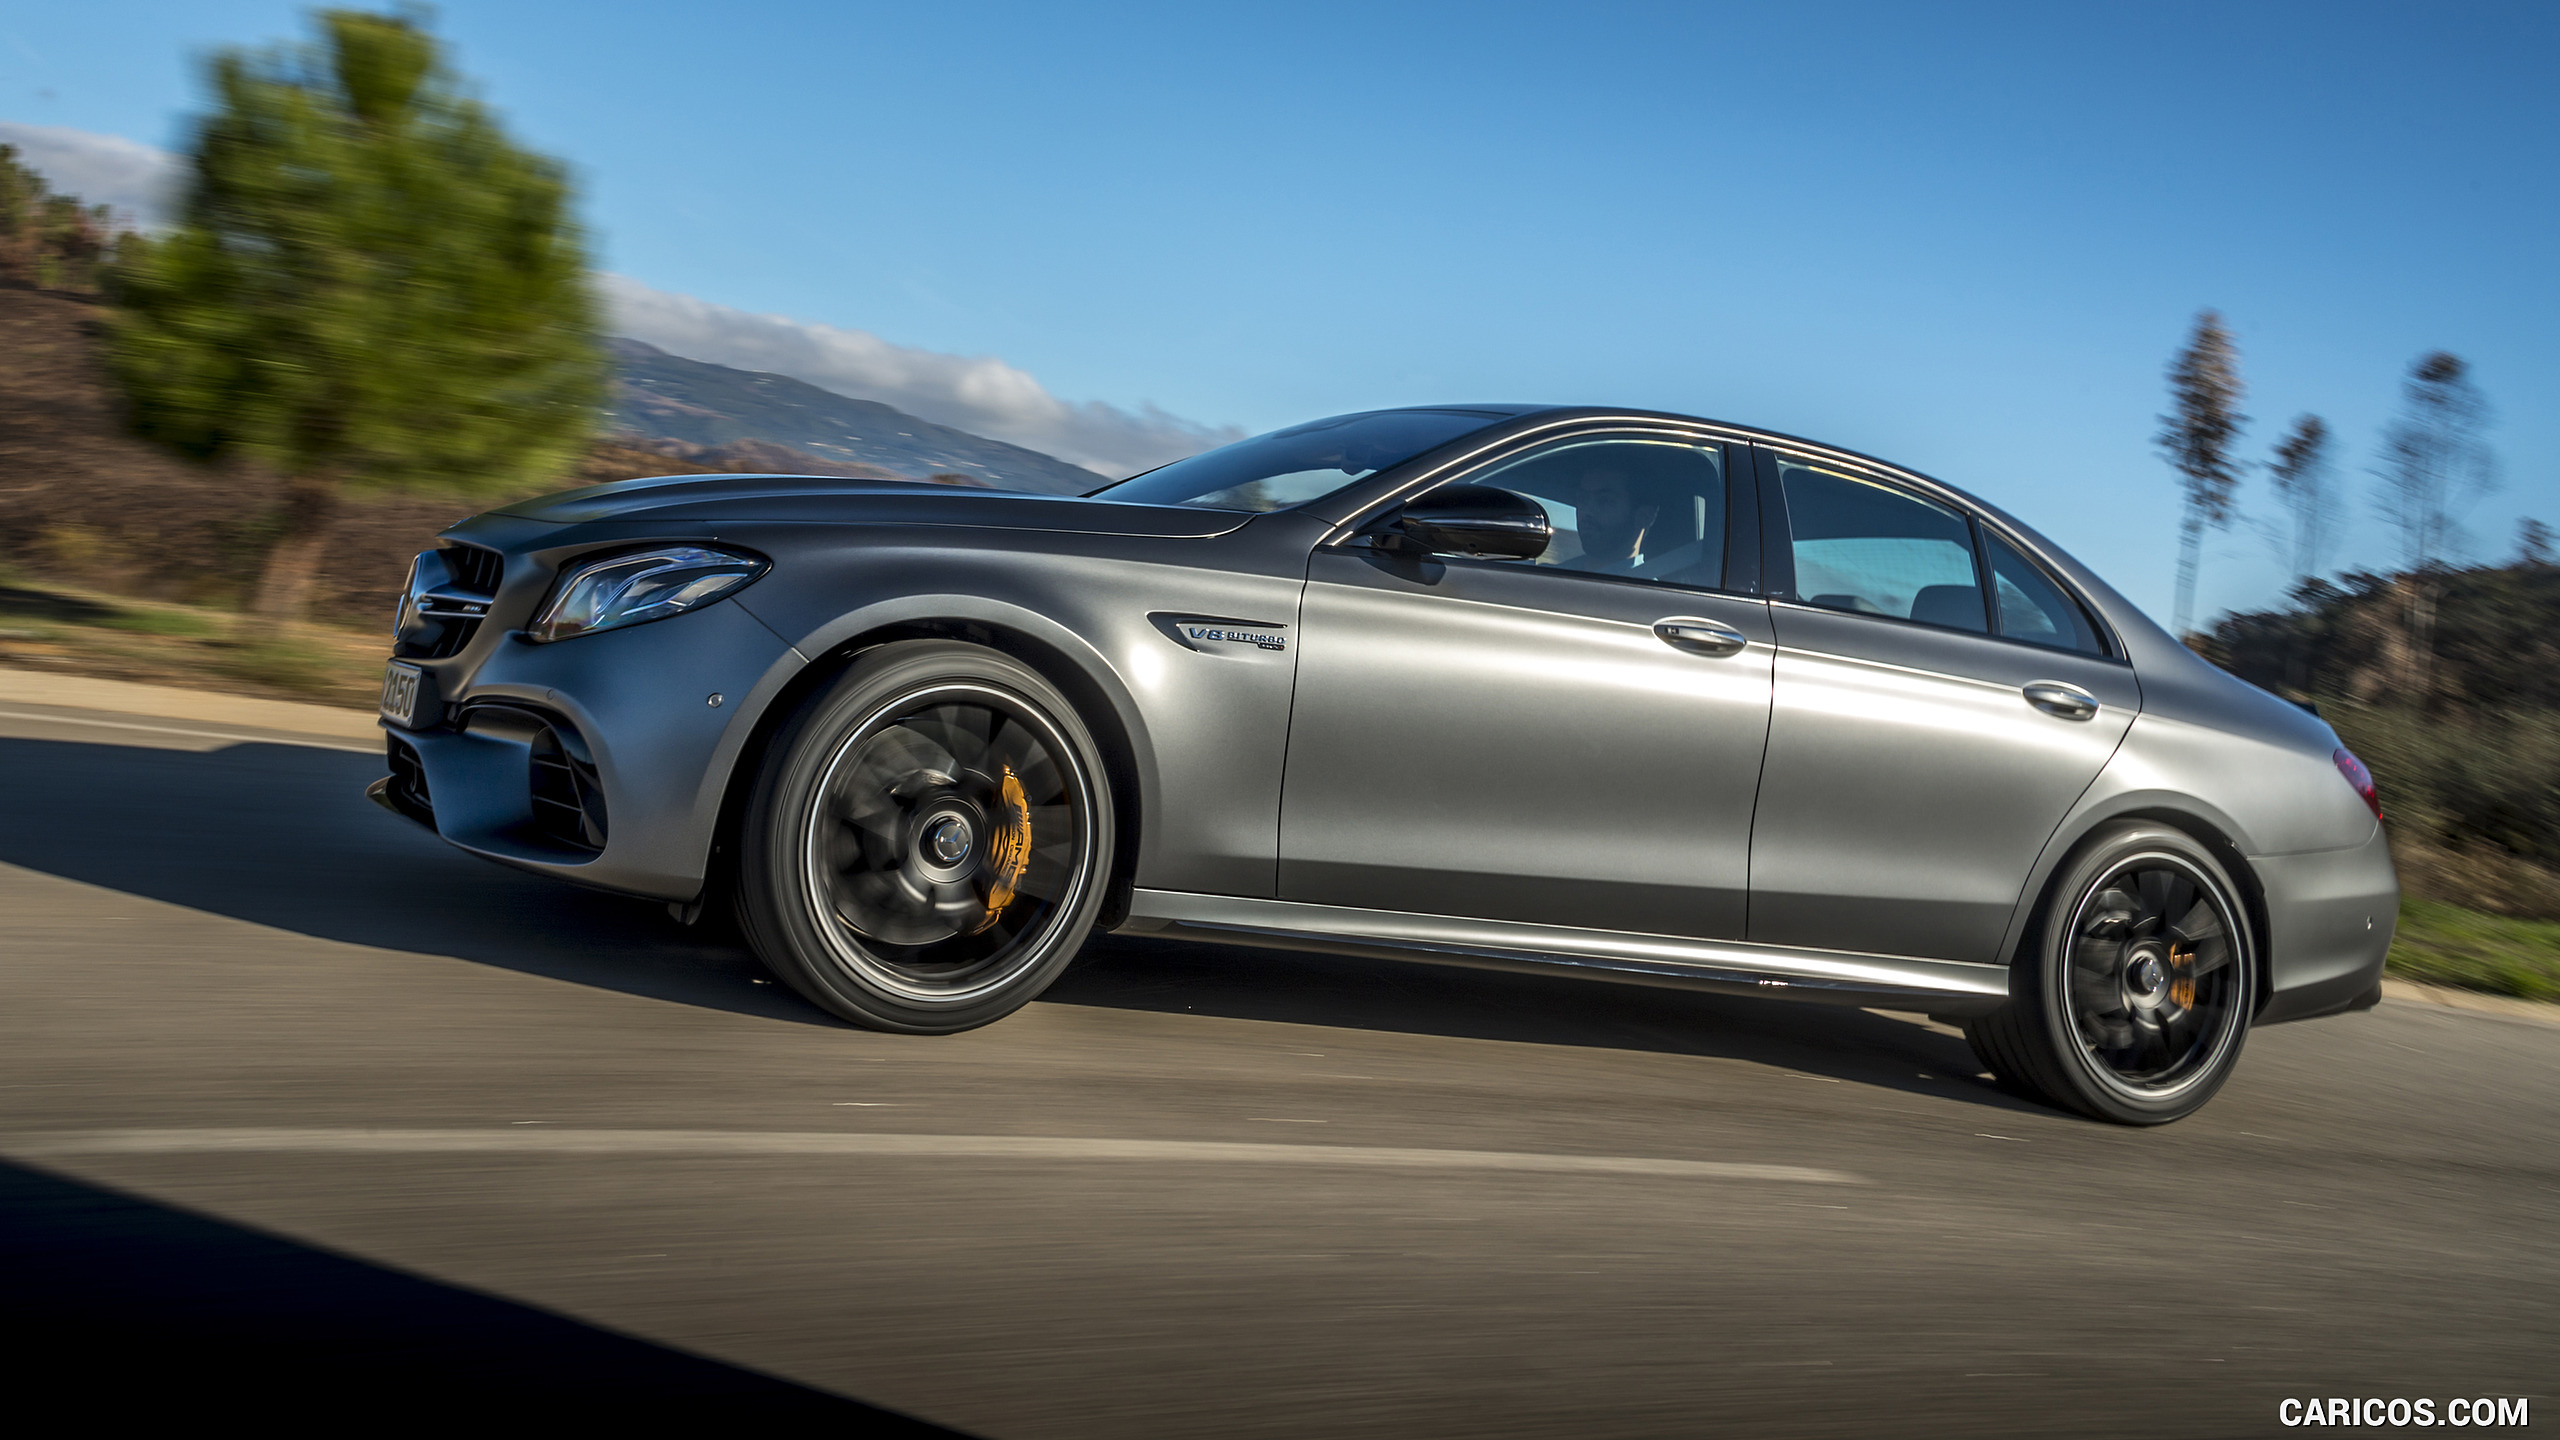 2018 Mercedes-AMG E63 S 4MATIC+ - Side, #289 of 323